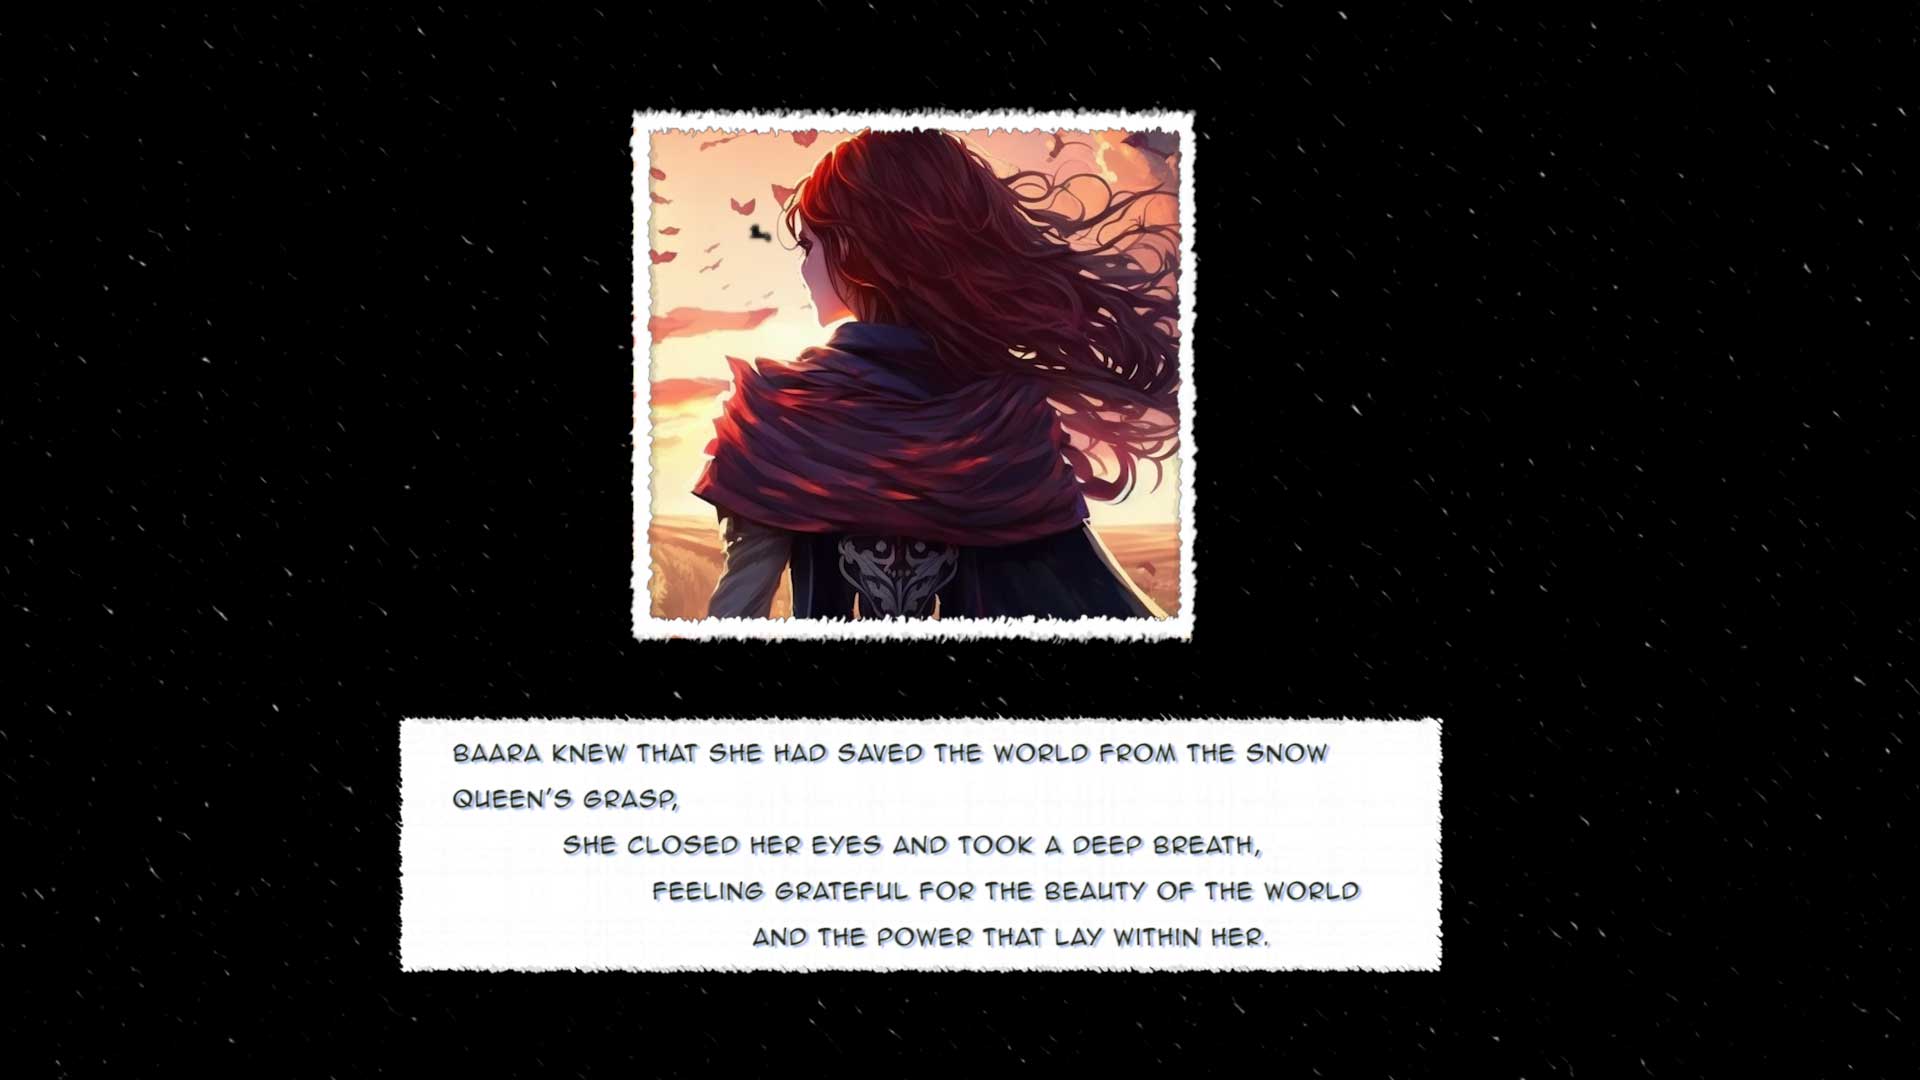 Baara knew that she had saved the world from the Snow Queen's grasp, 
	 She closed her eyes and took a deep breath, 
		feeling grateful for the beauty of the world  			and the power that lay within her.
